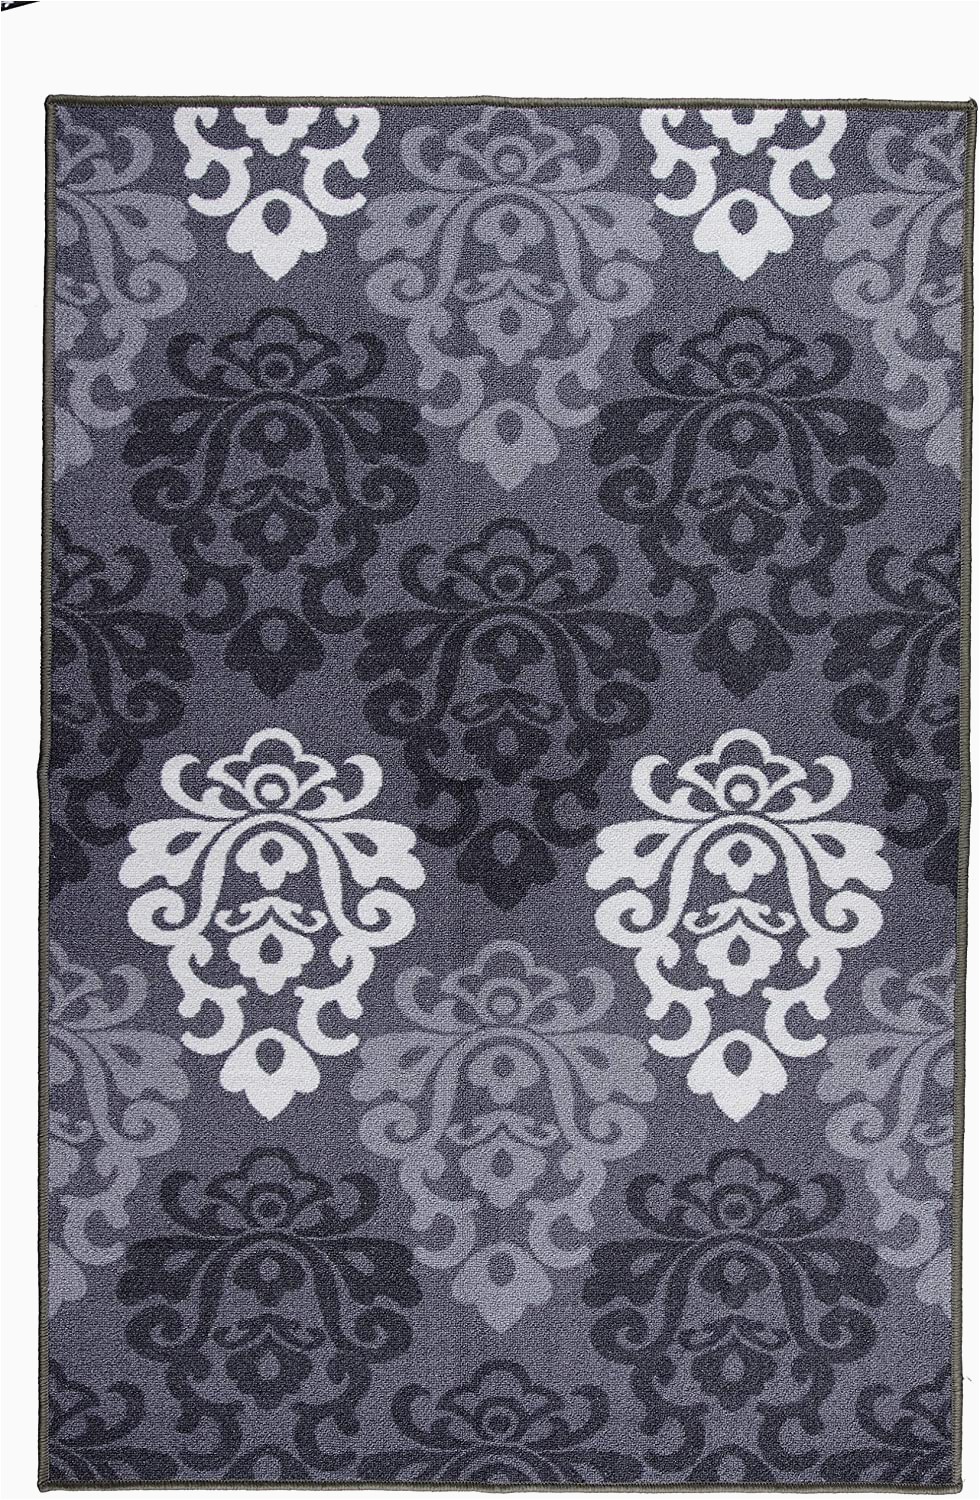 Non Skid area Rugs 5×7 Boarders Rugs Modern Non Slip Rubber Backing Kitchen and Bathroom Runner Rug area 5×7 Silver